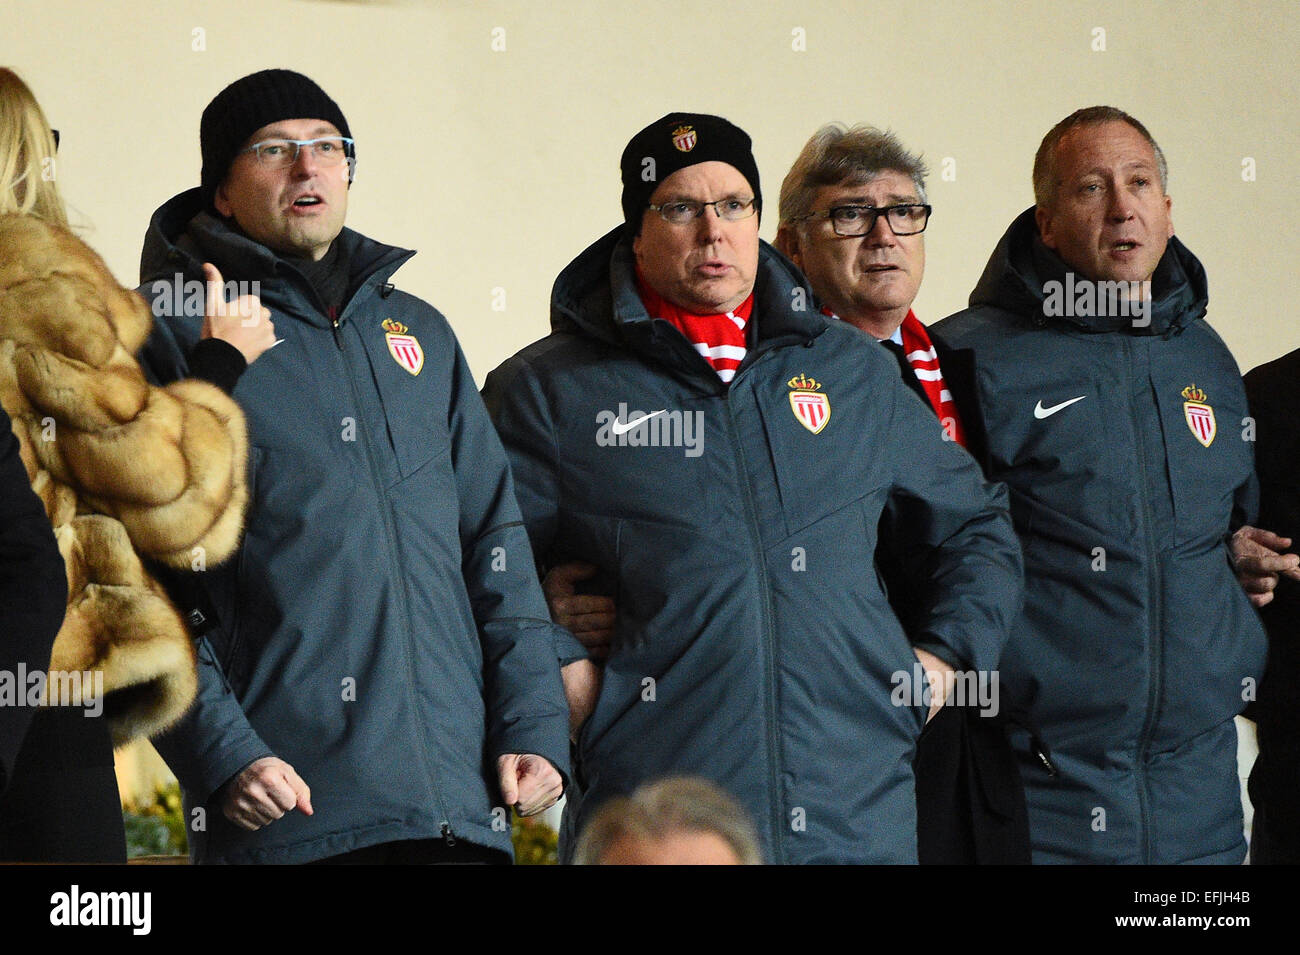 Monaco, France. 04th Feb, 2015. French League Cup semi-final match. Monaco versus Bastia. Dmitri Rybolovlev (PRESIDENT MONACO) - Vadim Vasilyev (VICE PRESIDENT) - PRINCE ALBERT II DE MONACO The game ended in a 0-0 draw and Bastia won the tie 6-7 on penalties to go through to the final where they will meet PSG. © Action Plus Sports/Alamy Live News Stock Photo